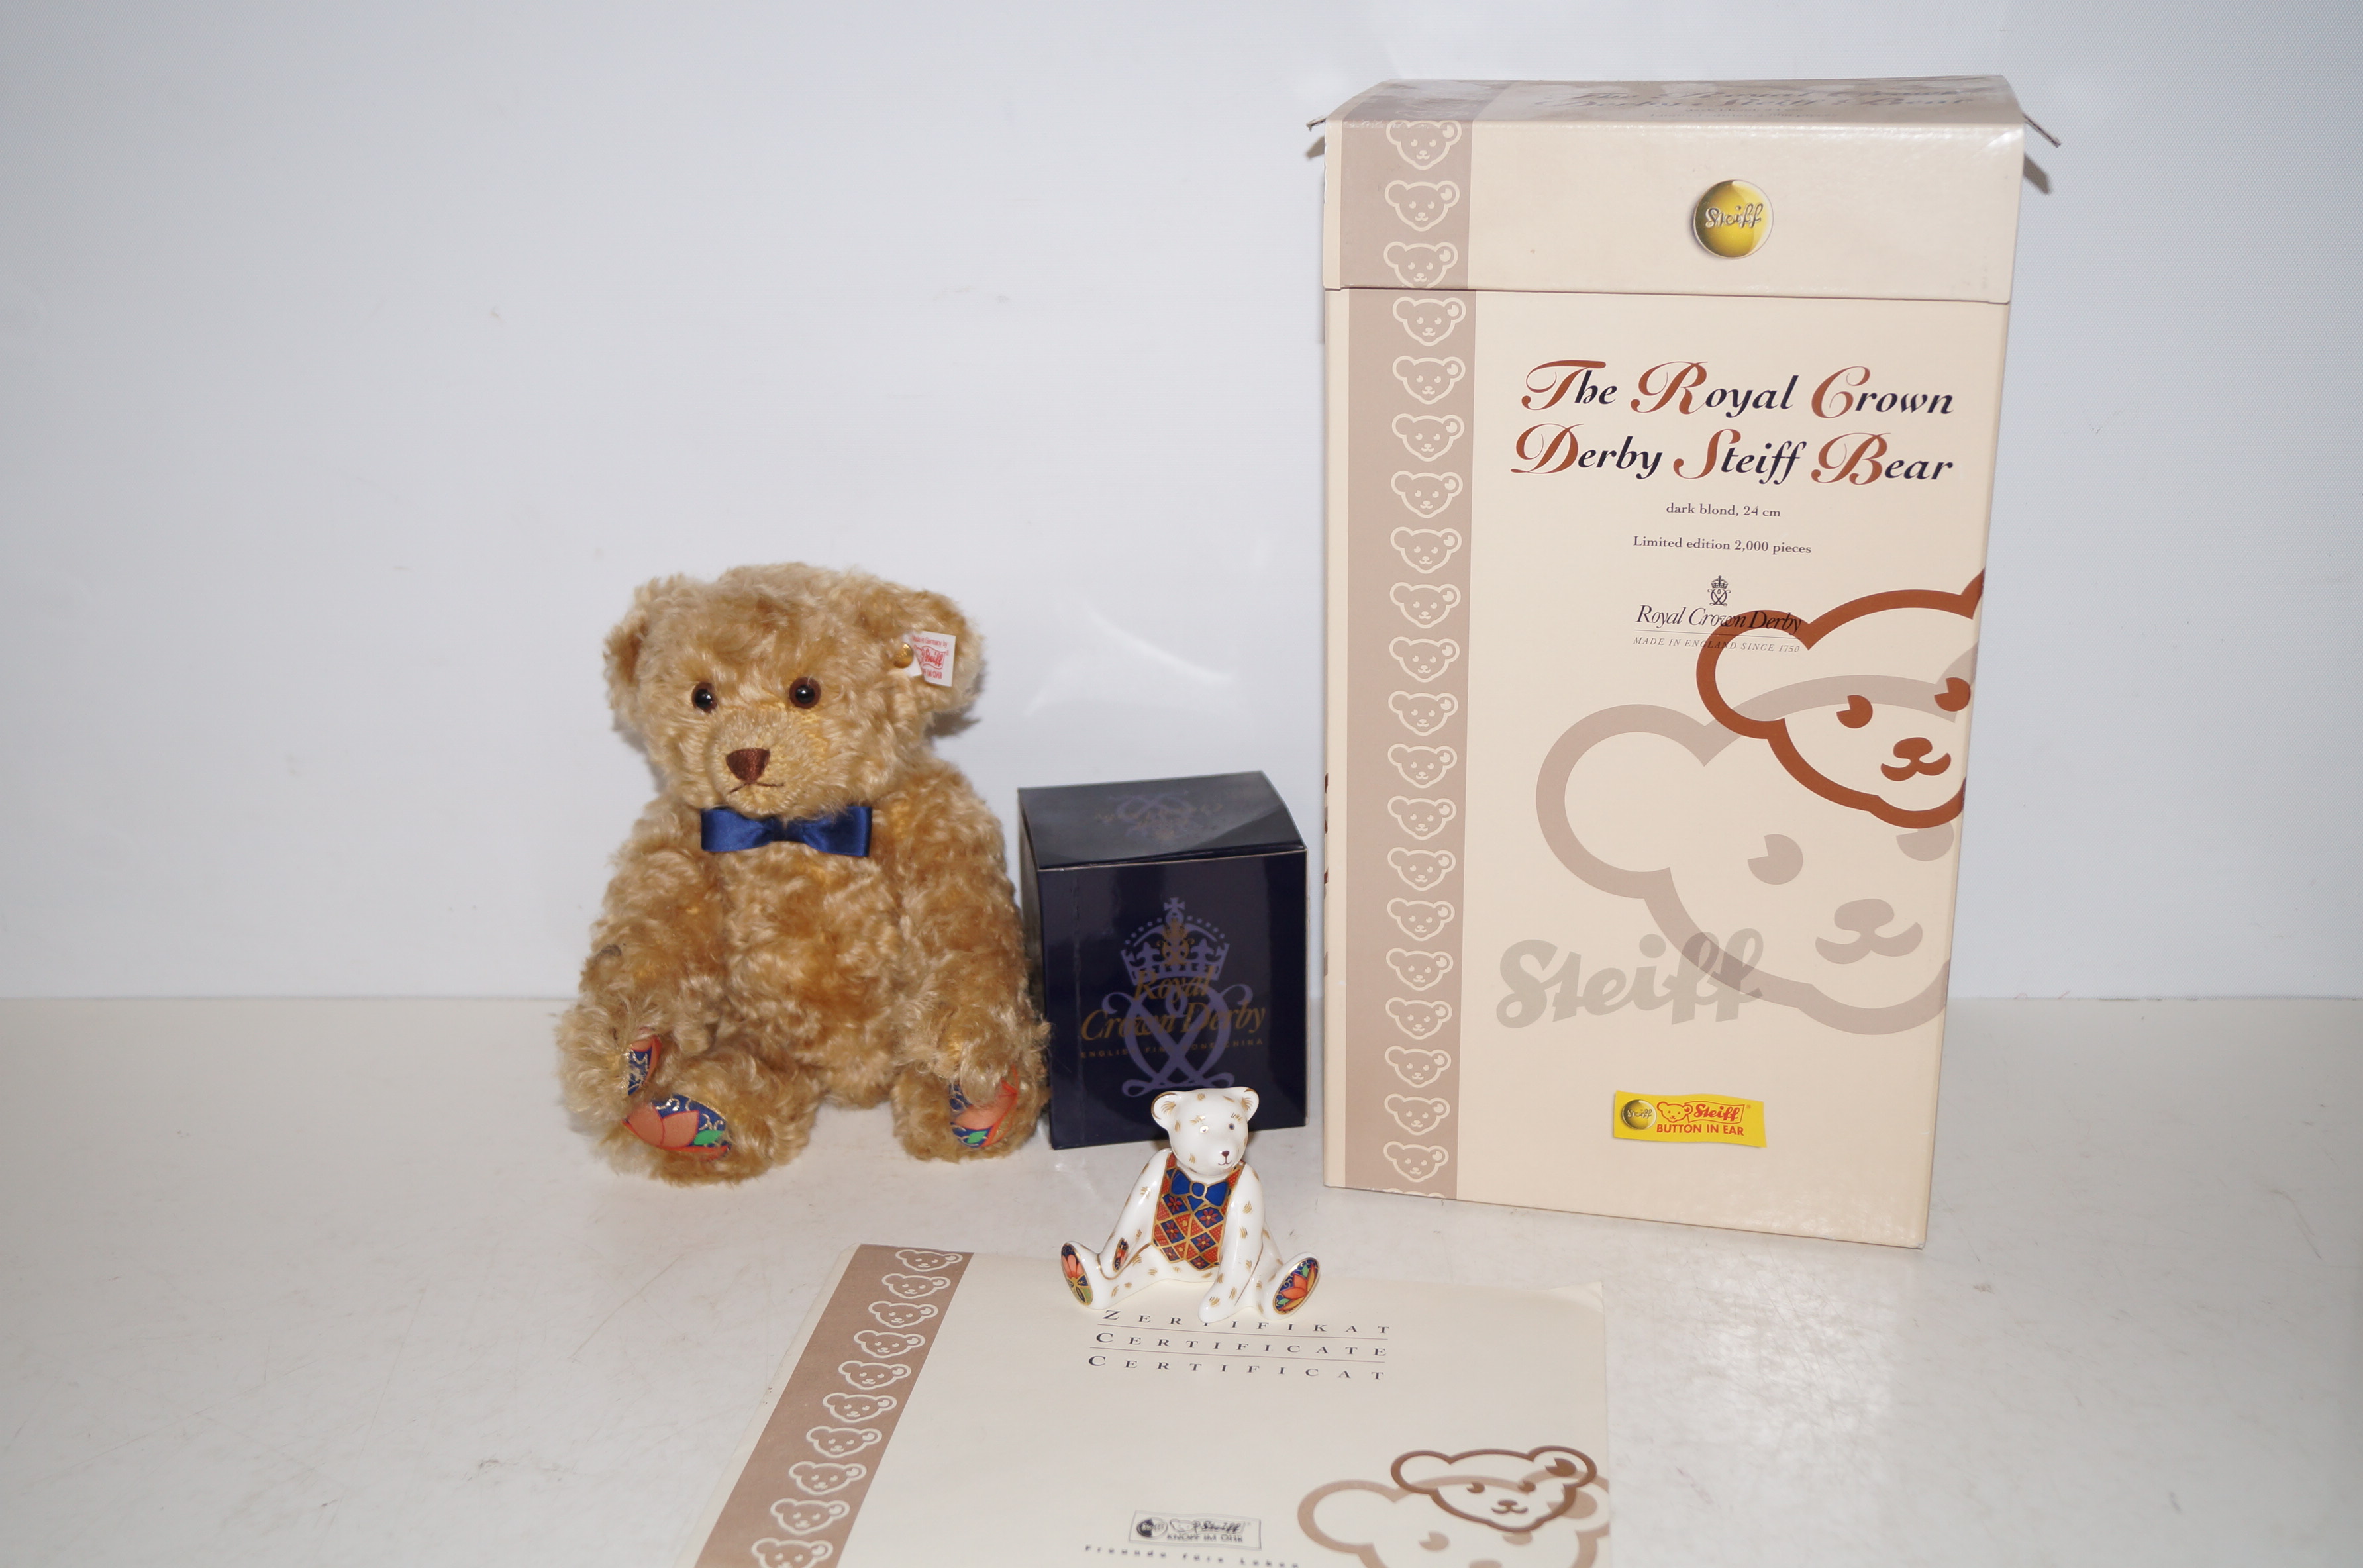 Royal Crown Derby Steiff bears - One ceramic and o